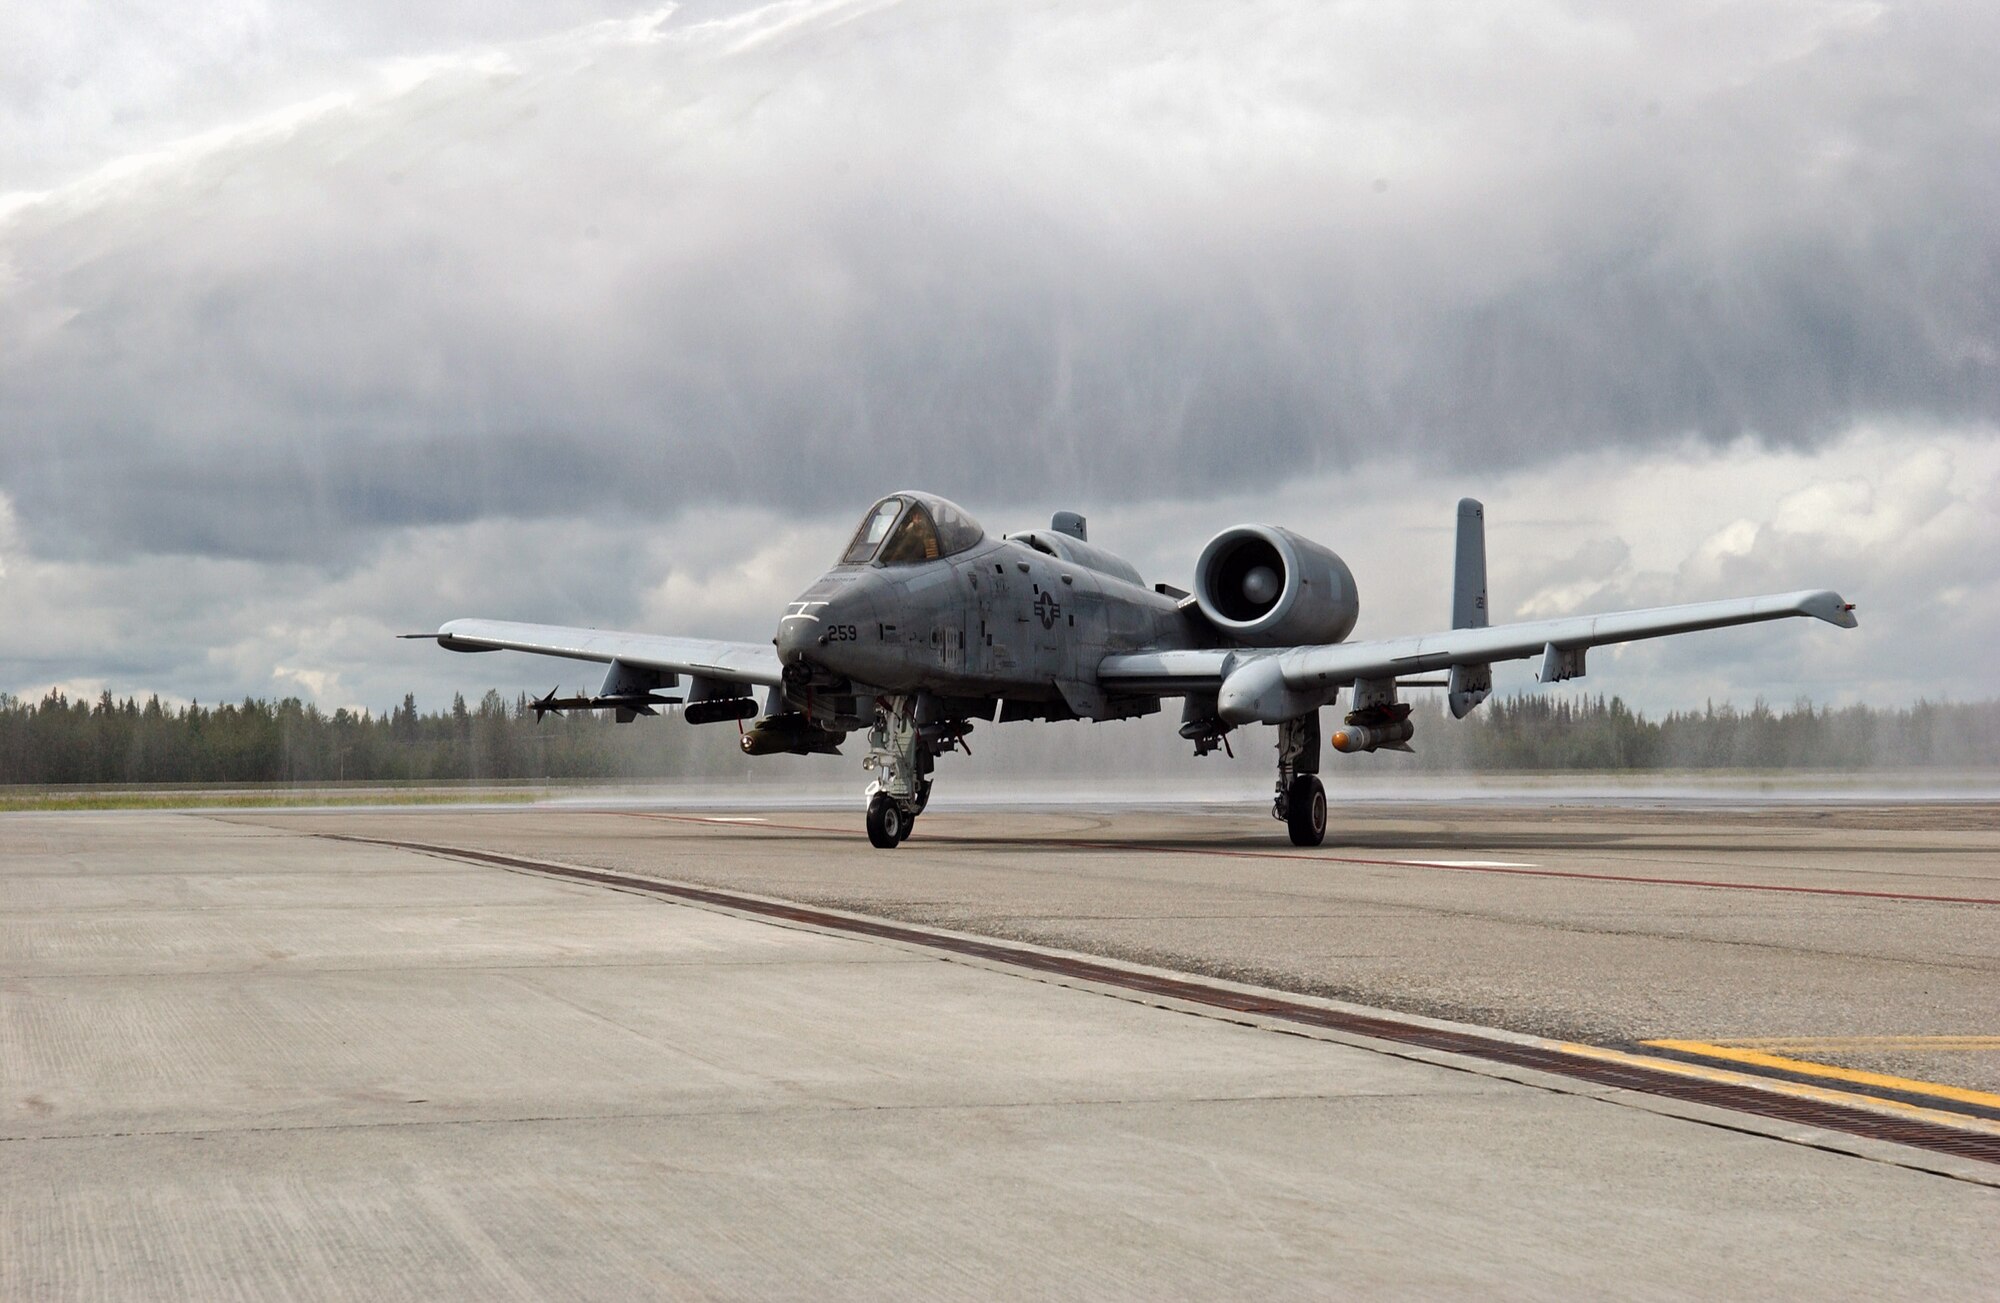 Lt. Col. Quentin Rideout taxis his A-10 Thunderbolt II at Eielson Air Force Base, Alaska, July 31. The first two A-10s arrived at Eielson Dec. 18, 1981; the last two A-10s are set to leave Aug. 15 for Moody AFB, Ga., and Gowen Field, Idaho. Colonel Rideout is the 355th Fighter Squadron commander. (U.S. Air Force photo/Airman 1st Class Jonathan Snyder)